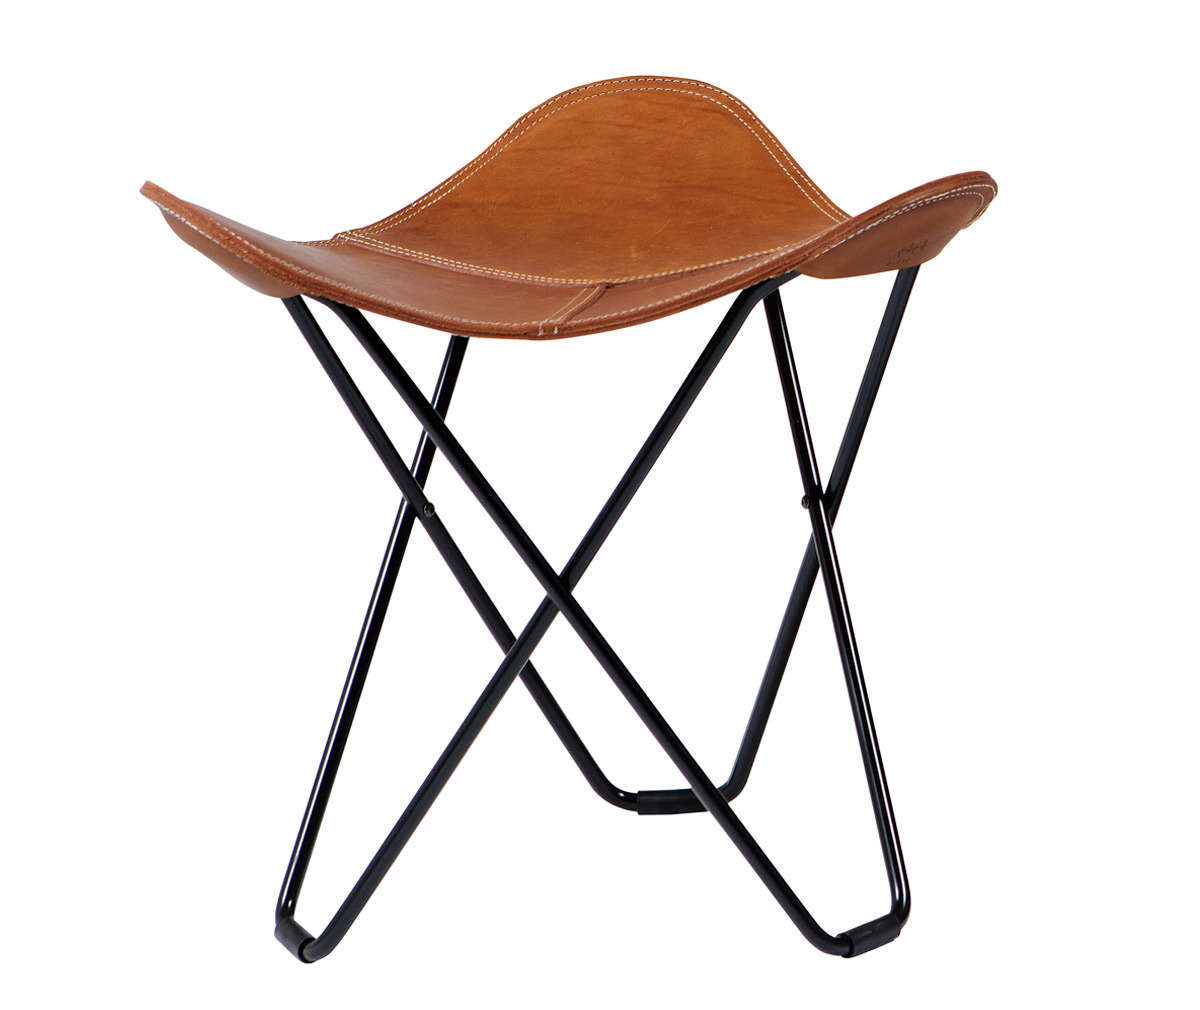 Cuero Design Flying Goose Stool Brown Pampa Leather